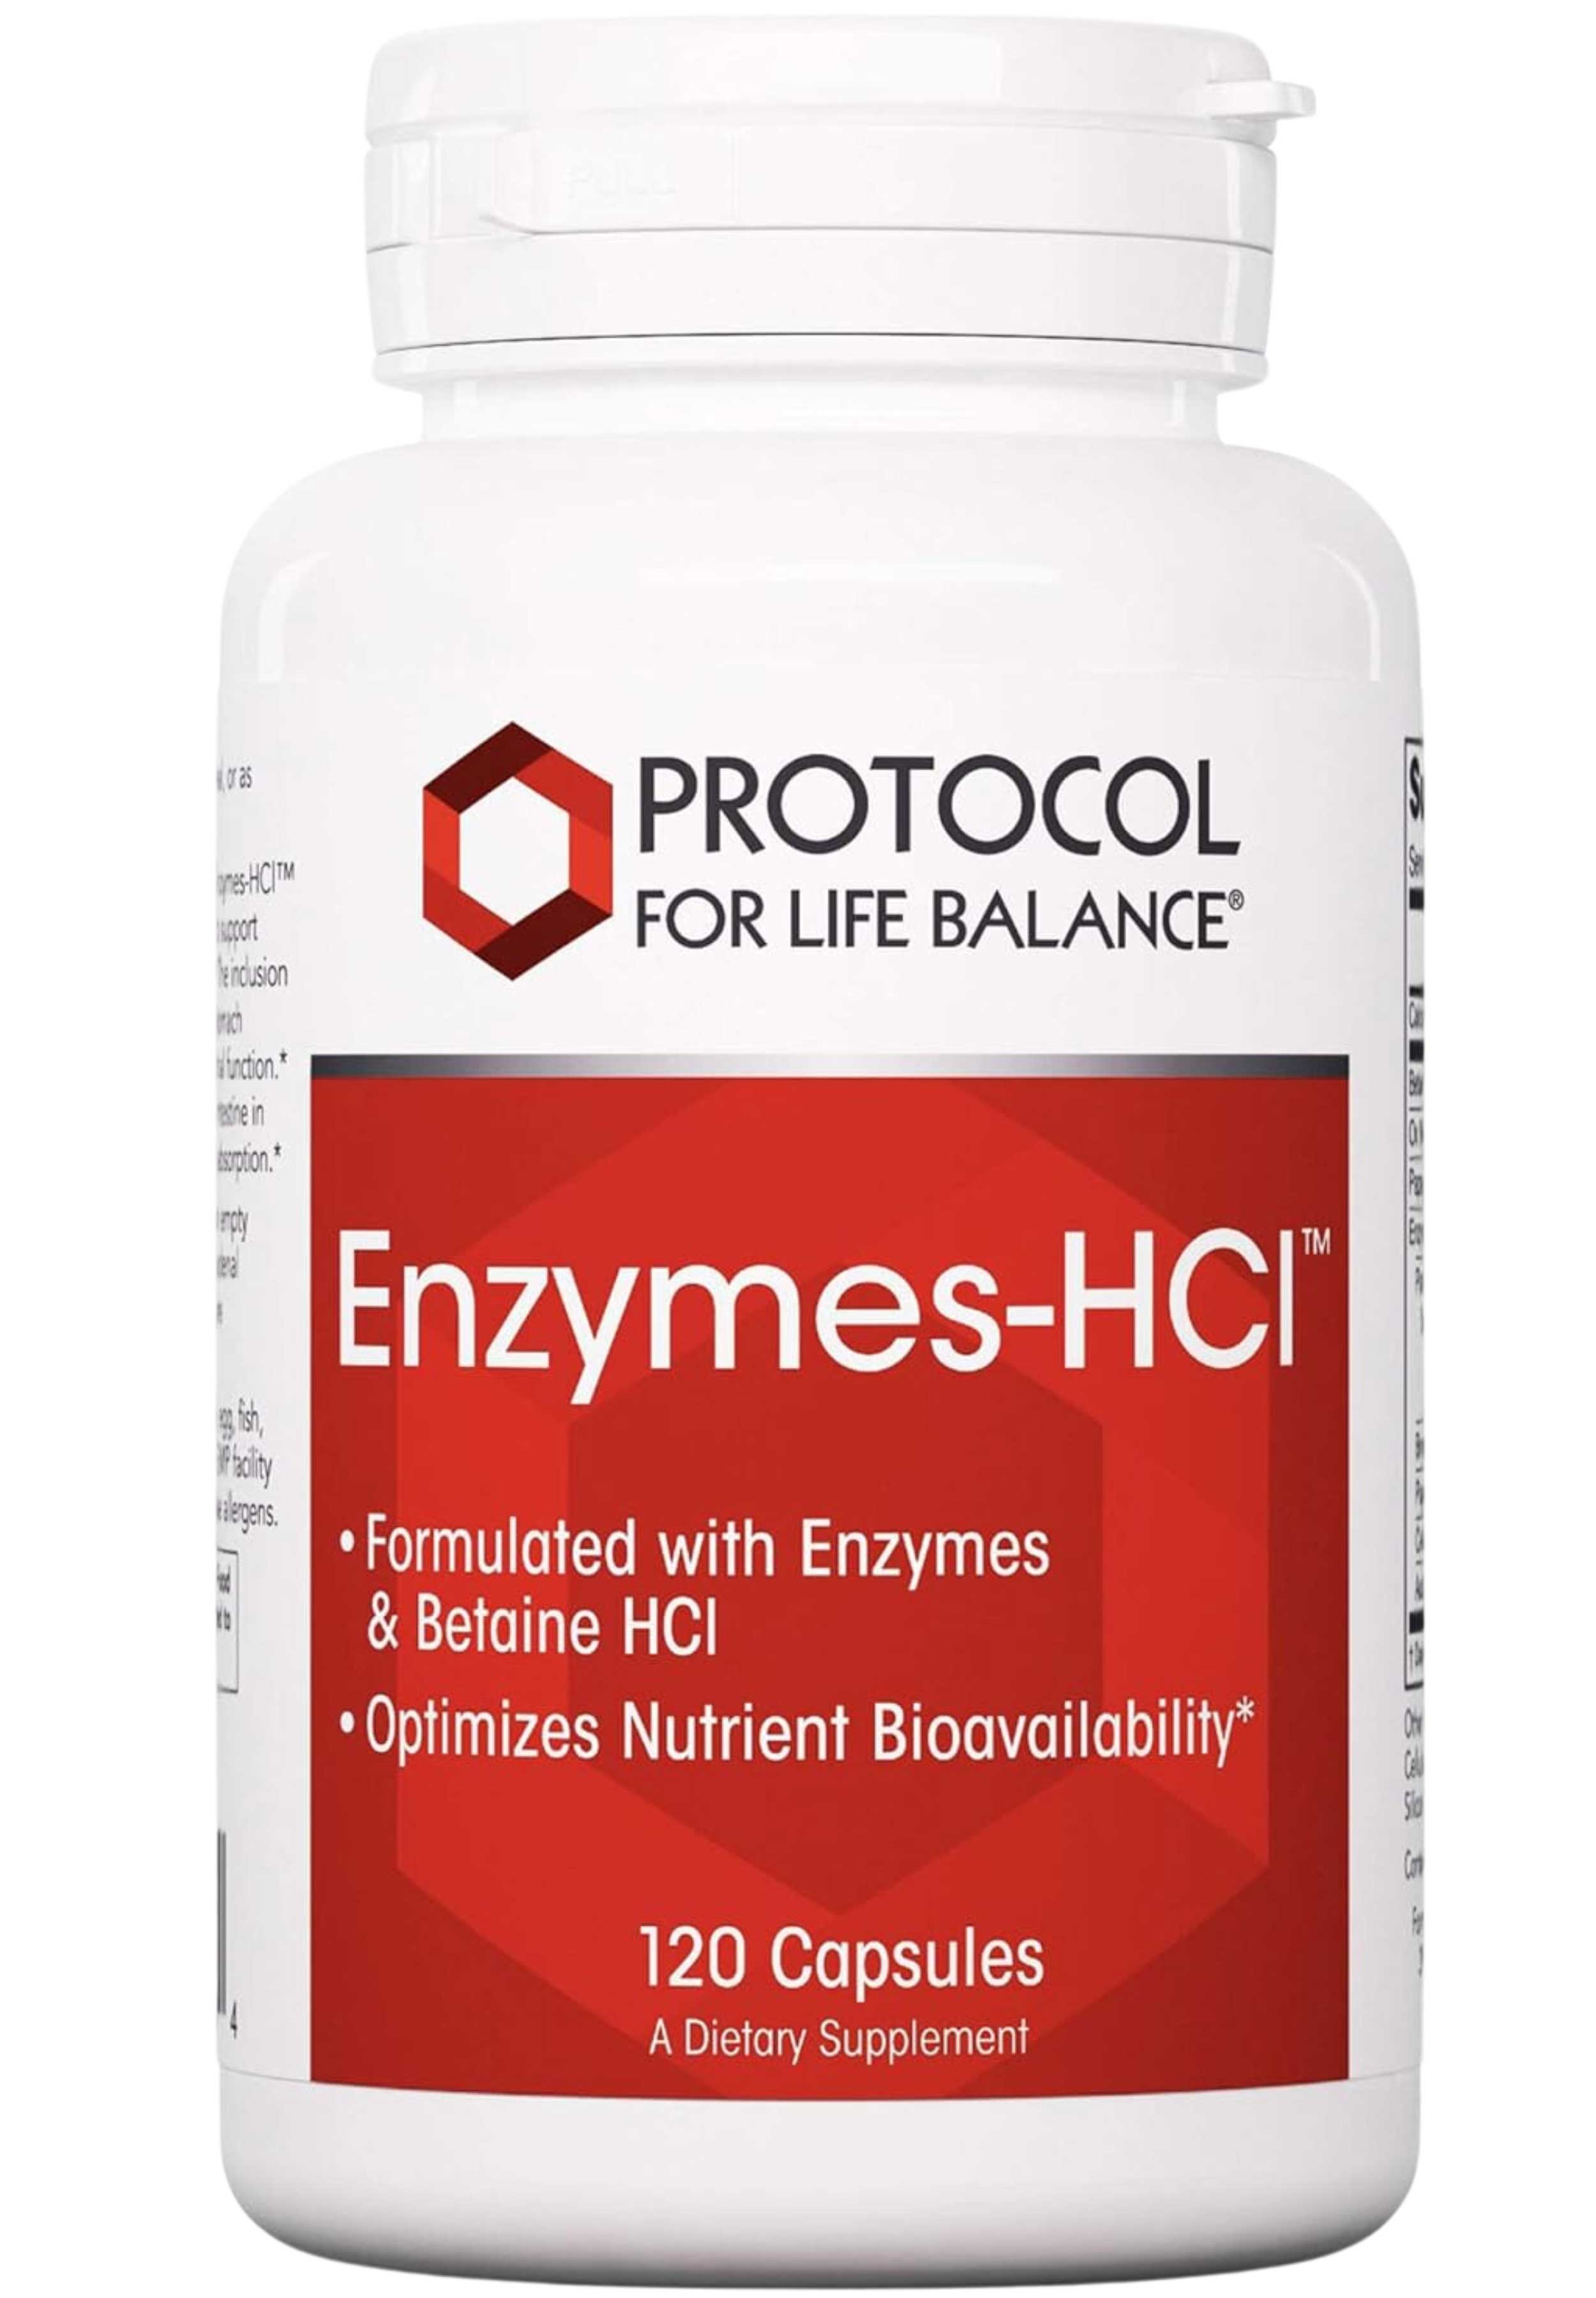 Protocol for Life Balance Enzymes-HCl